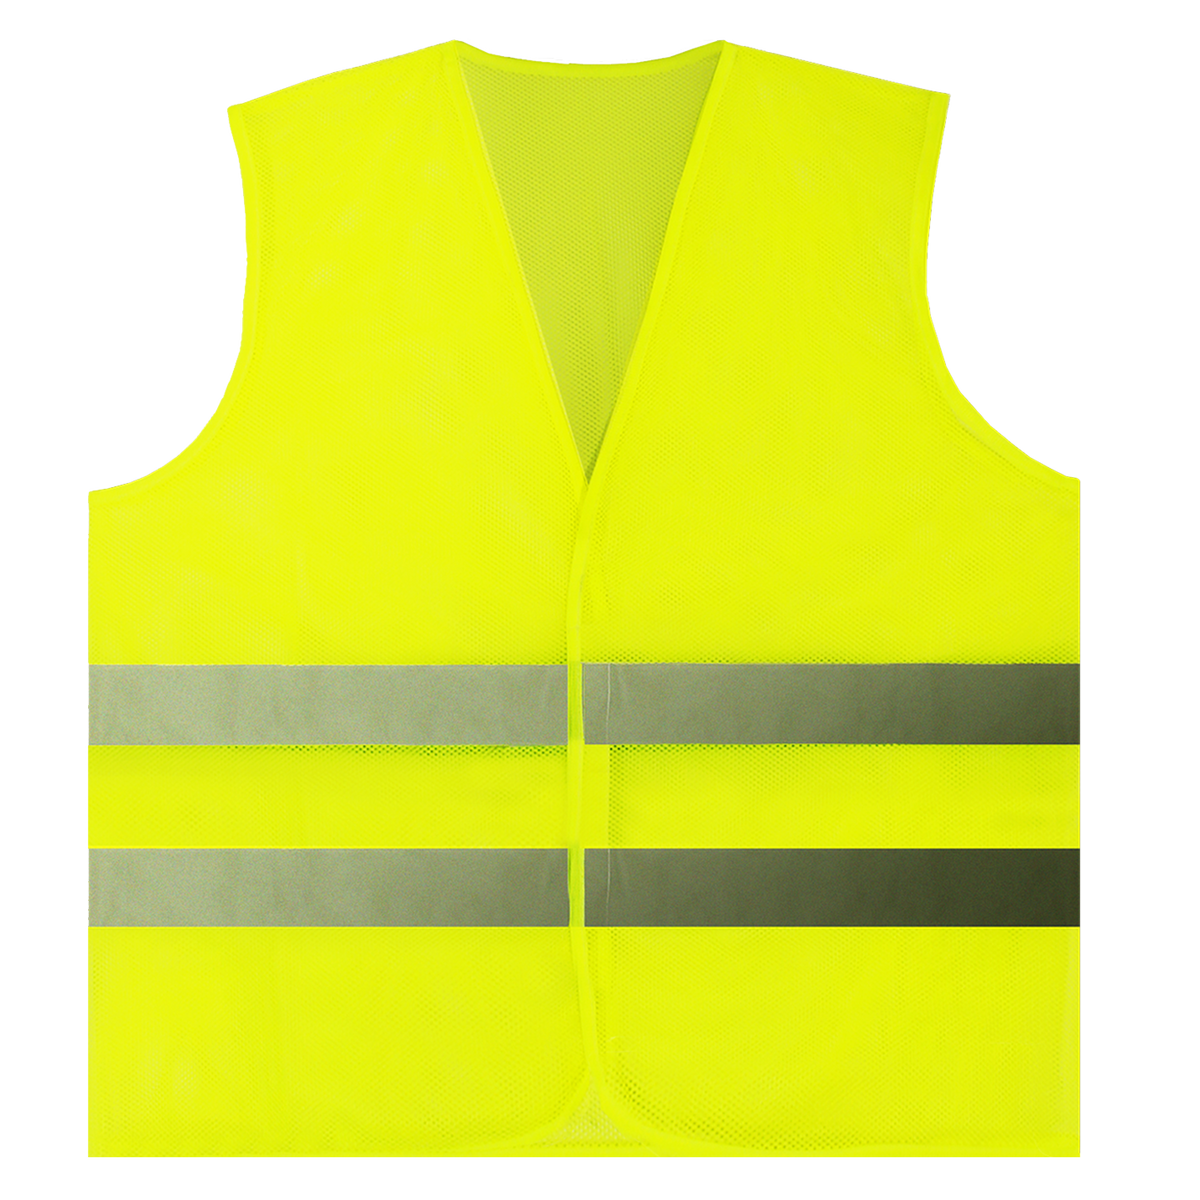 Safety Reflective Jackets - Universal Enterprises - Authorized Dealer,  Supplier - Safety Equipment Distributor Solution Company in India,  Hyderabad, Secunderabad, Nellore, Andhra Pradesh, Chennai, Bangalore.